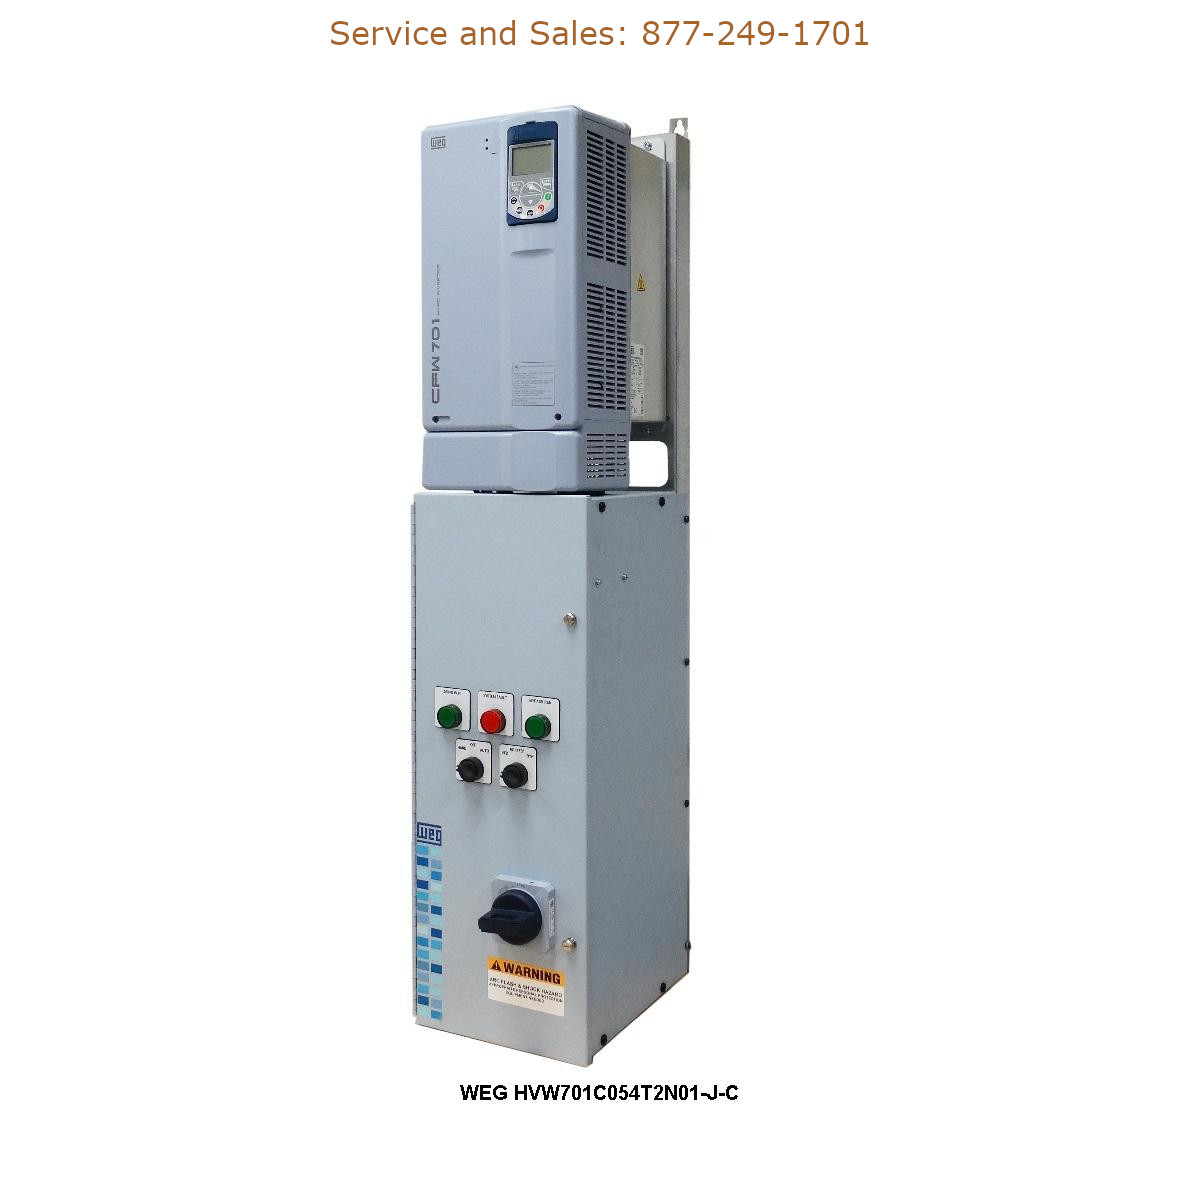 WEG HVW701C054T2N01-J-C WEG Model Number HVW701C054T2N01-J-C WEG Drives, Variable Speed Drives Repair Service, Troubleshooting, Replacement Parts https://gesrepair.com/wp-content/uploads/2022/WEG/WEG_HVW701C054T2N01-J-C_Drives_Variable_Speed_Drives.jpg